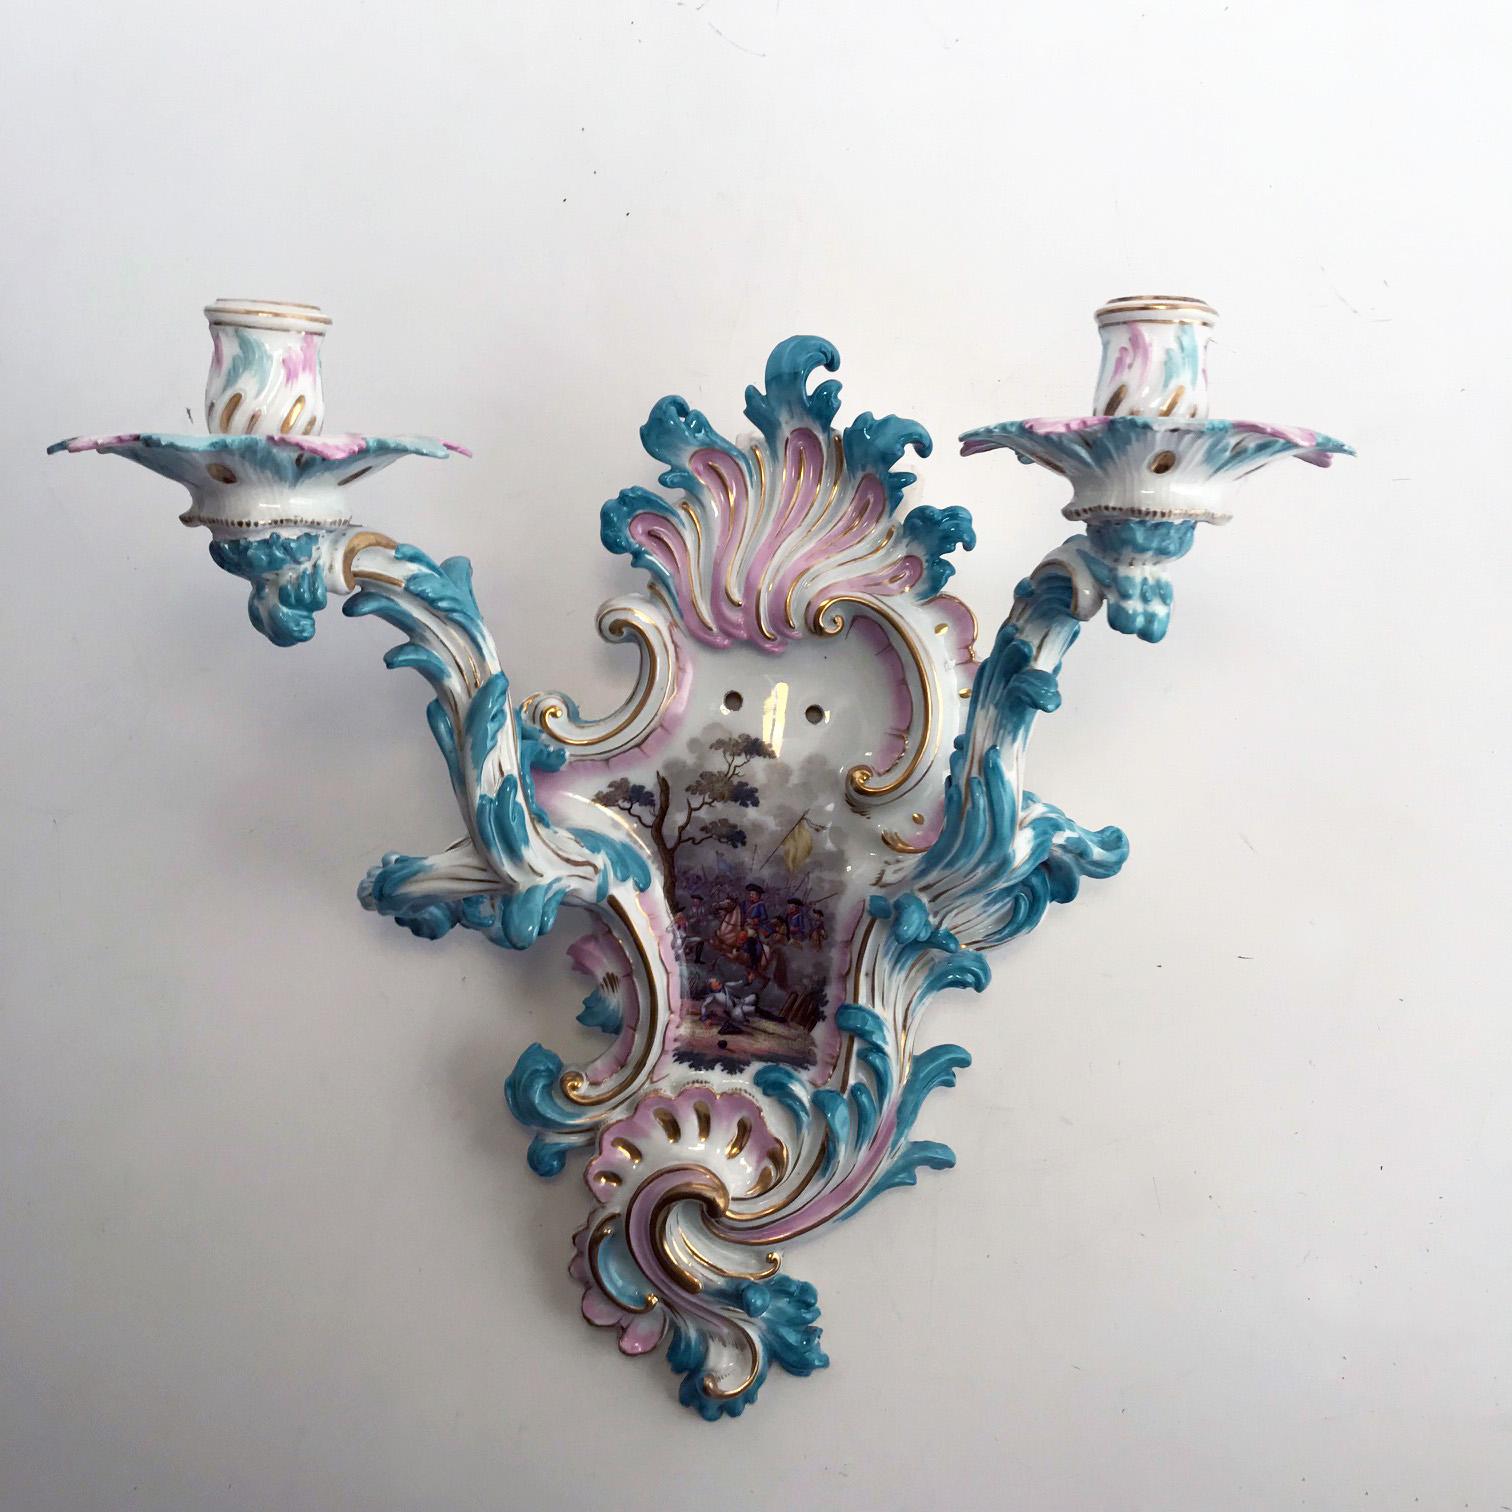 This antique pair is hard paste, German and painted in the palette of Meissen but unmarked , the pink and blue is entirely characteristic of Meissen of the third quarter of the 19th century. (it might also conceivably be by Sitzendorf.) Each is